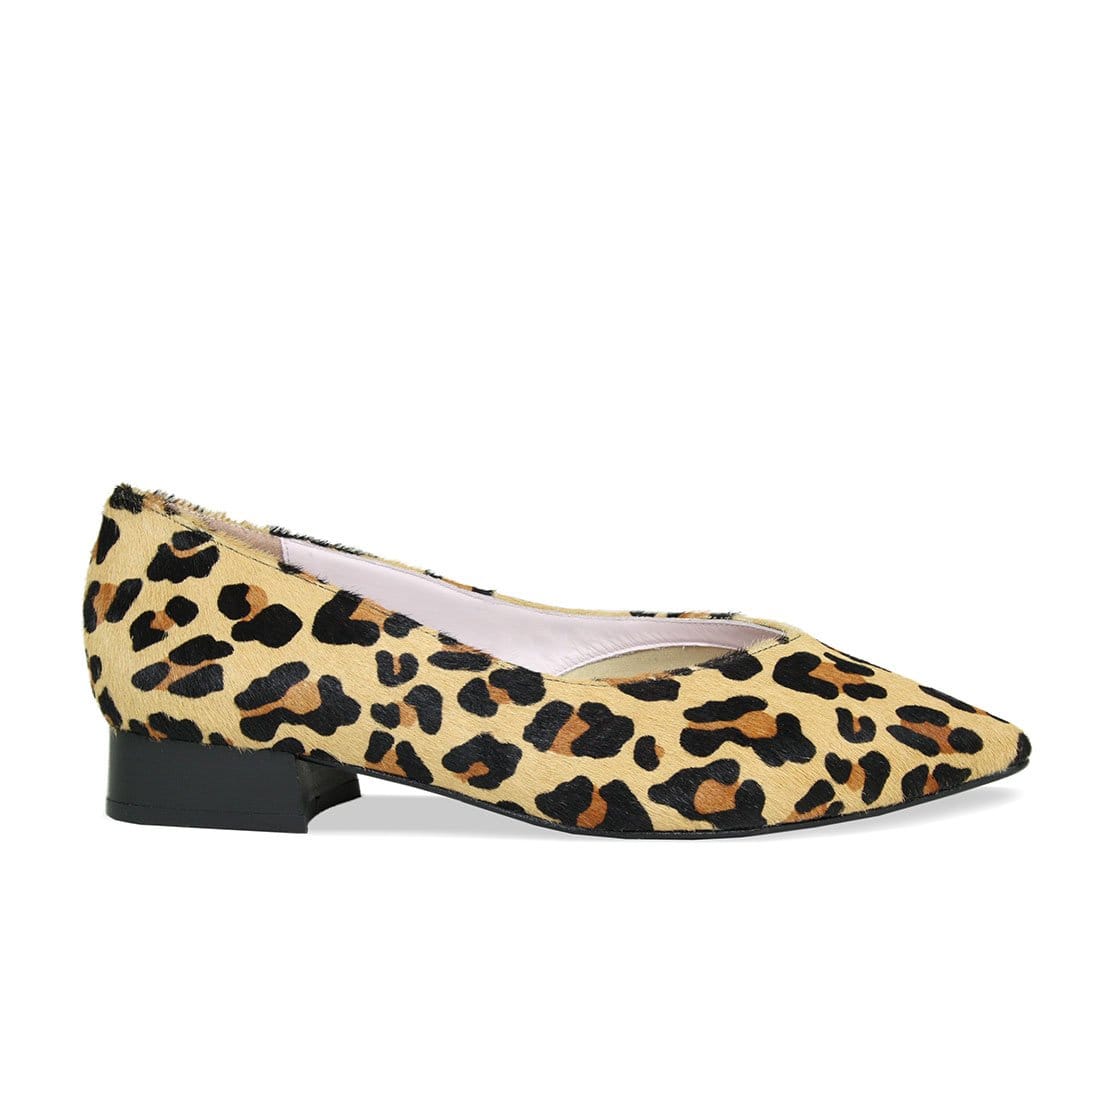 Sydney: Luxe Leopard - Comfortable Pointed Flats – Sole Bliss USA